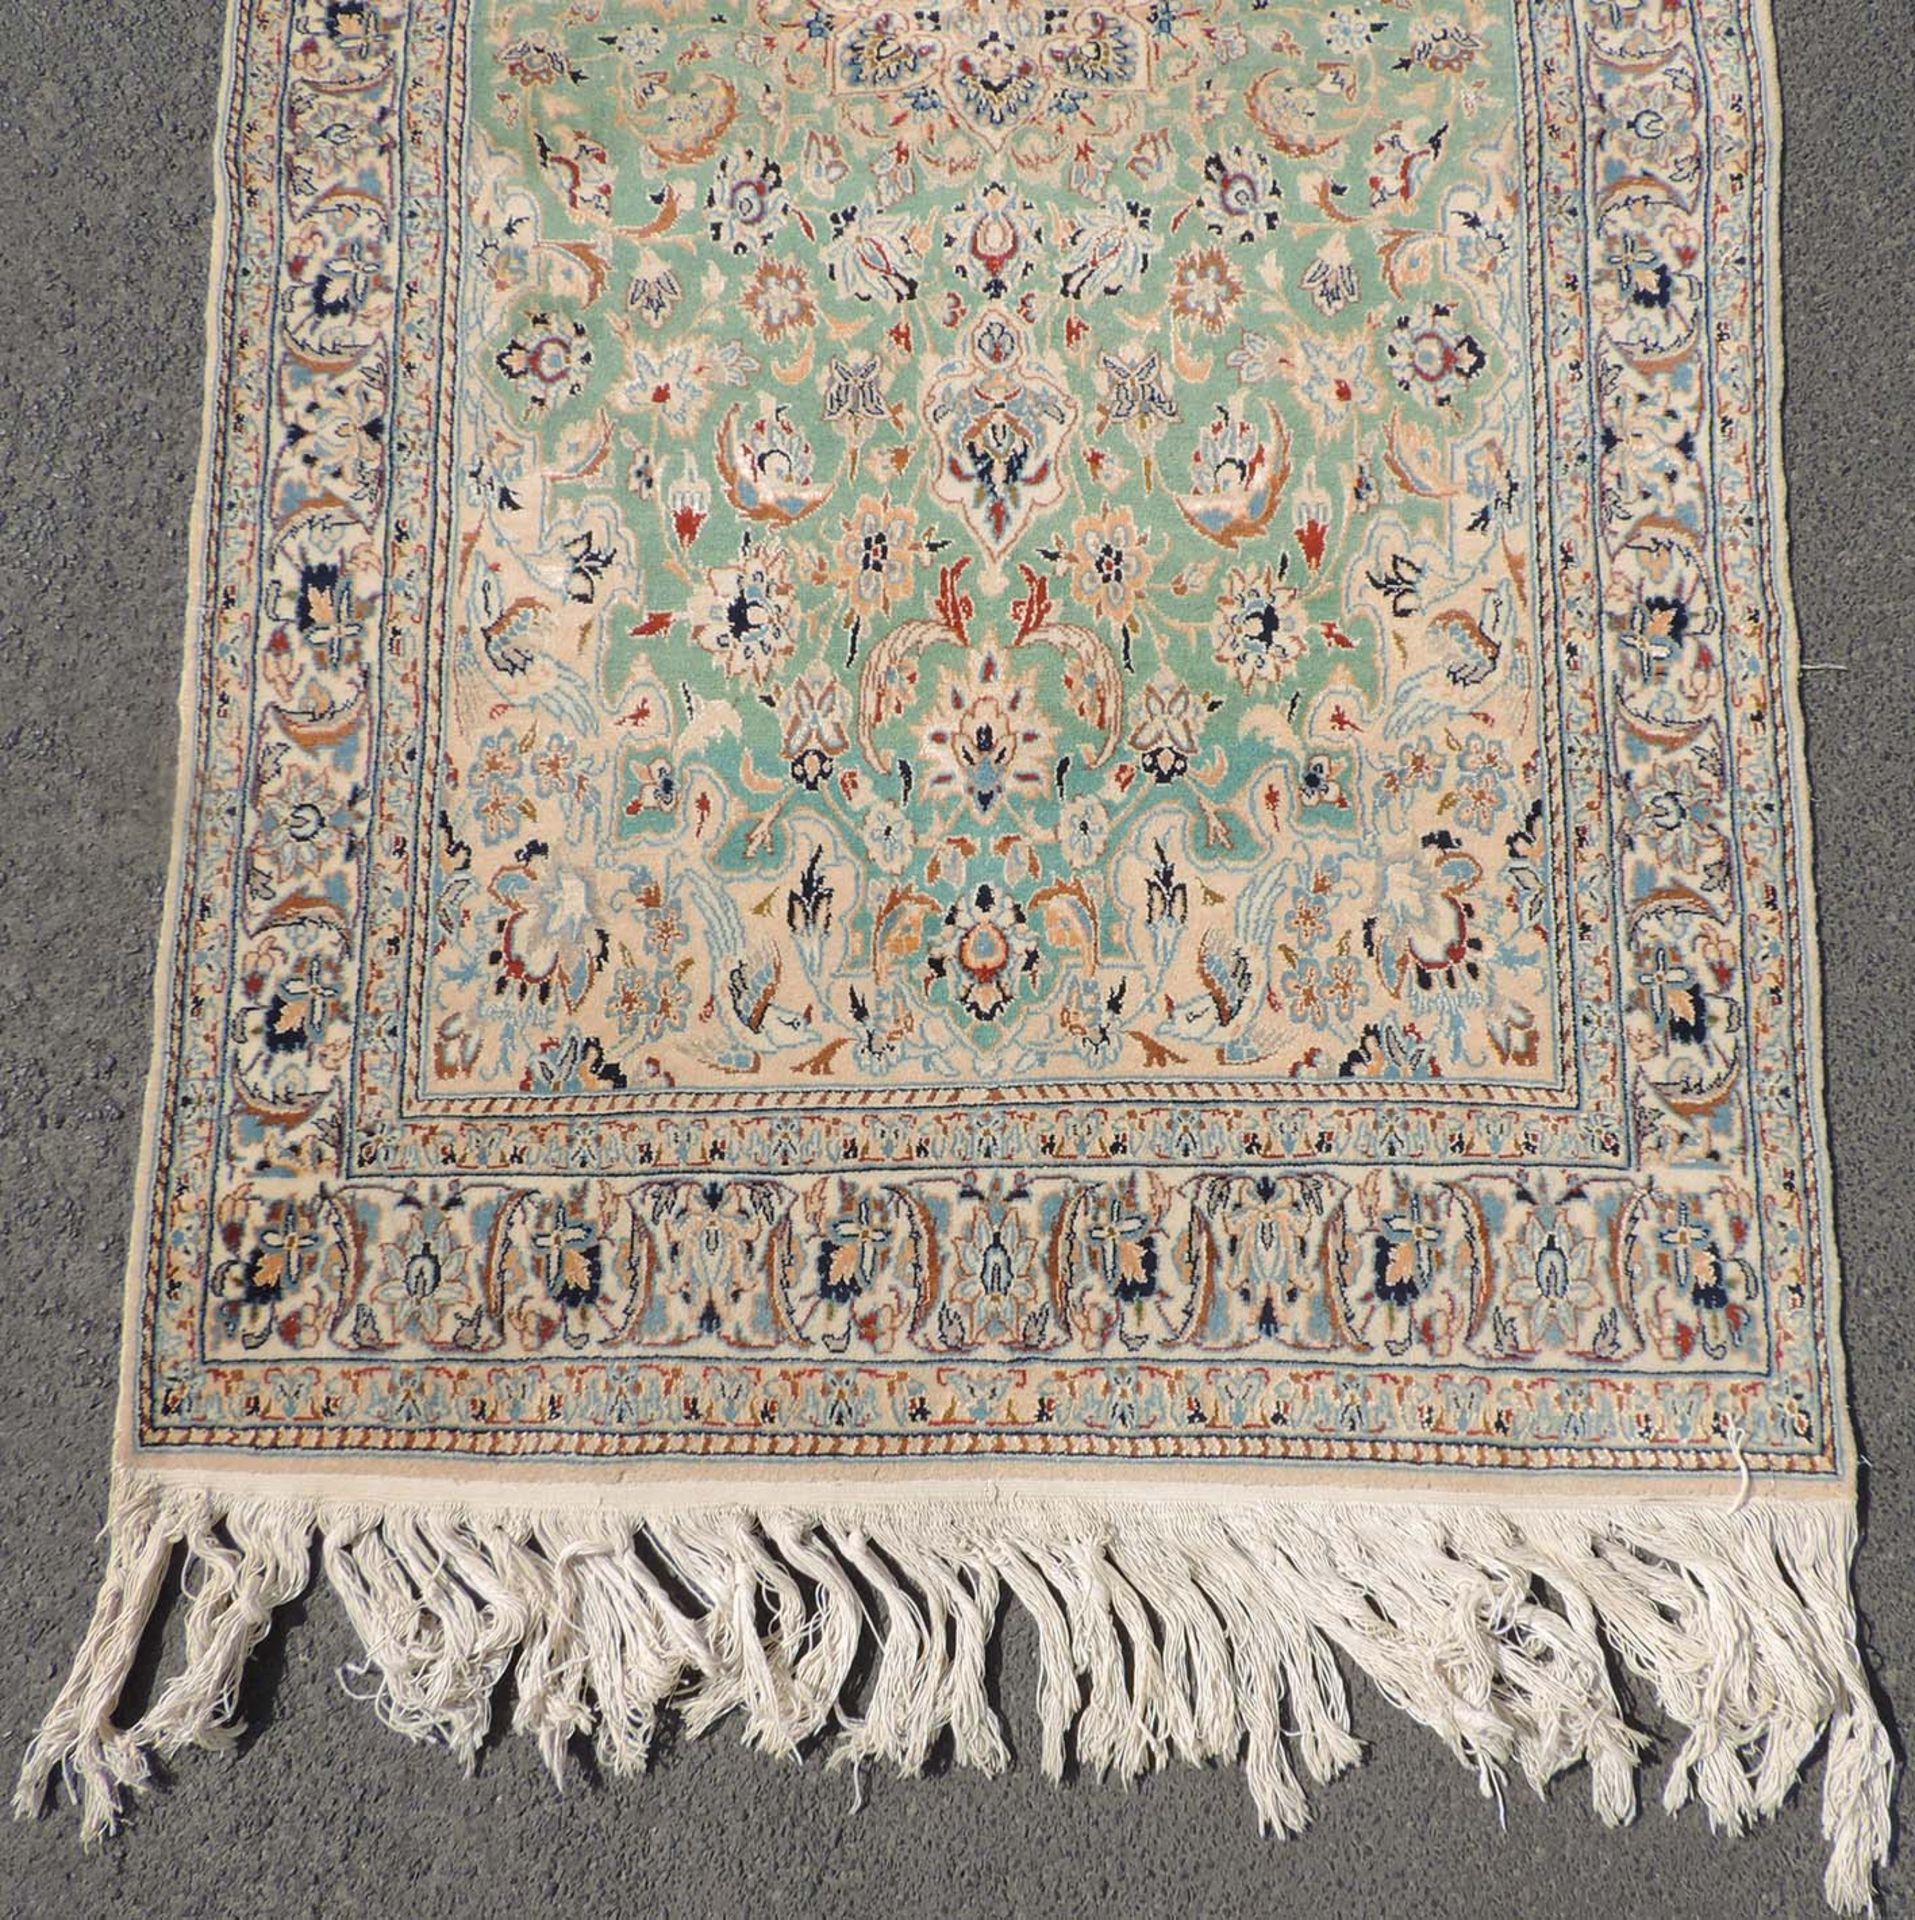 Nain Persian rug. Iran. Very fine weave.214 cm x 113 cm. Knotted by hand. Cork wool and silk on - Image 2 of 6